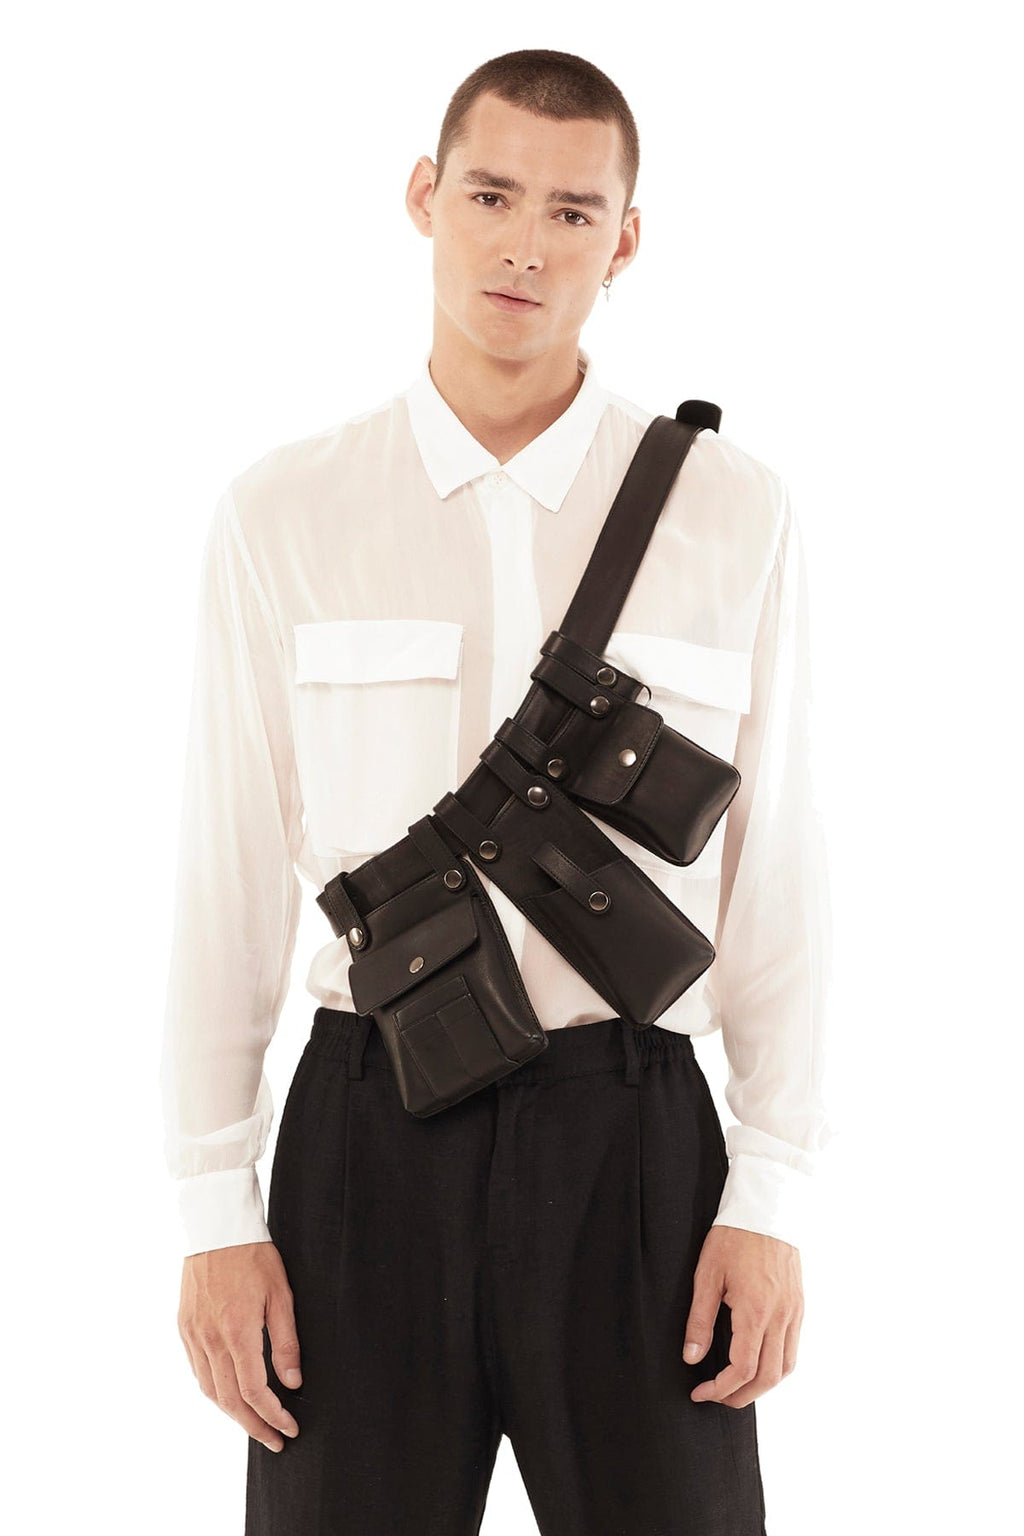 Good Quality Army Black Belt (Leather) - Online Army Store